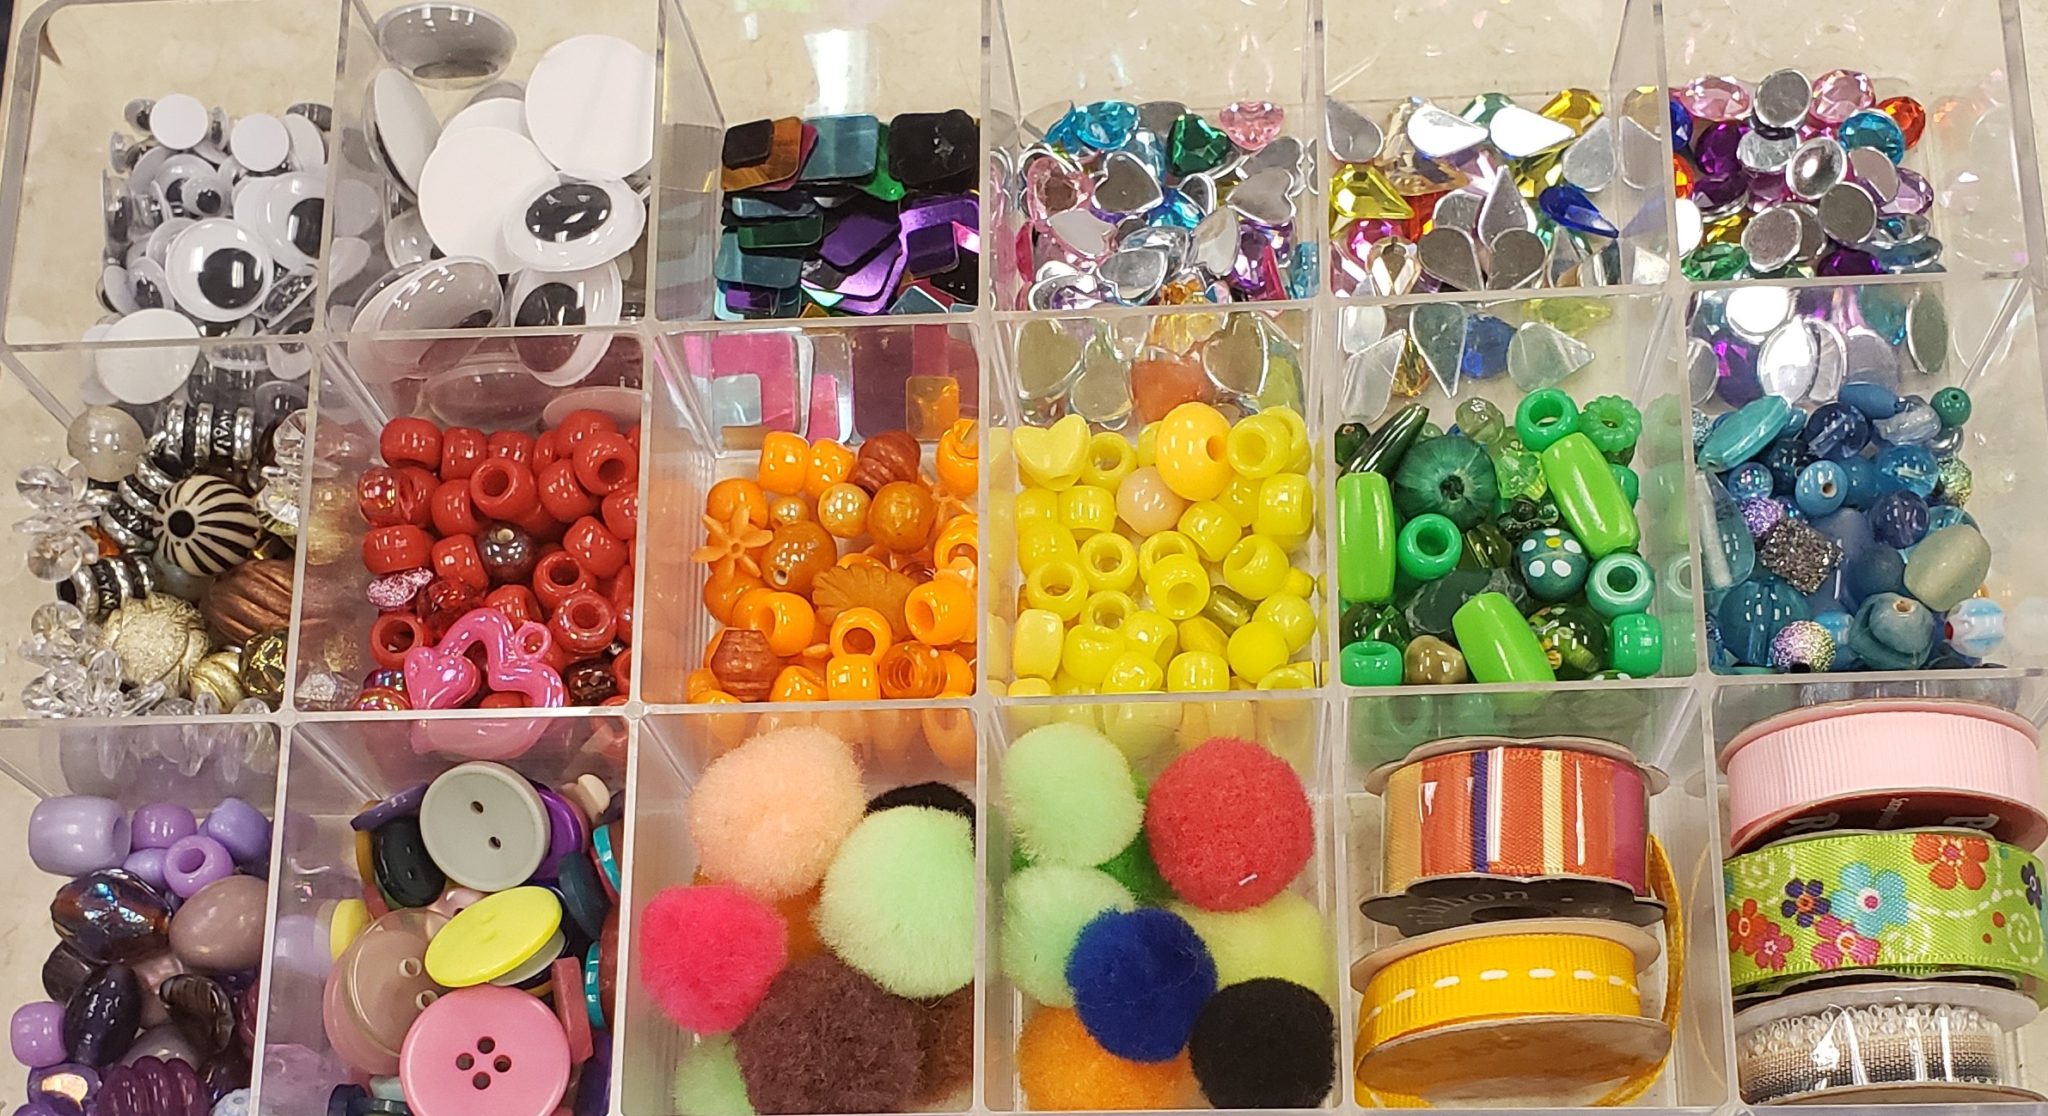 Tray with examples of loose parts: googly eyes, sequins of various sizes, beads, buttons, pom poms and ribbon.